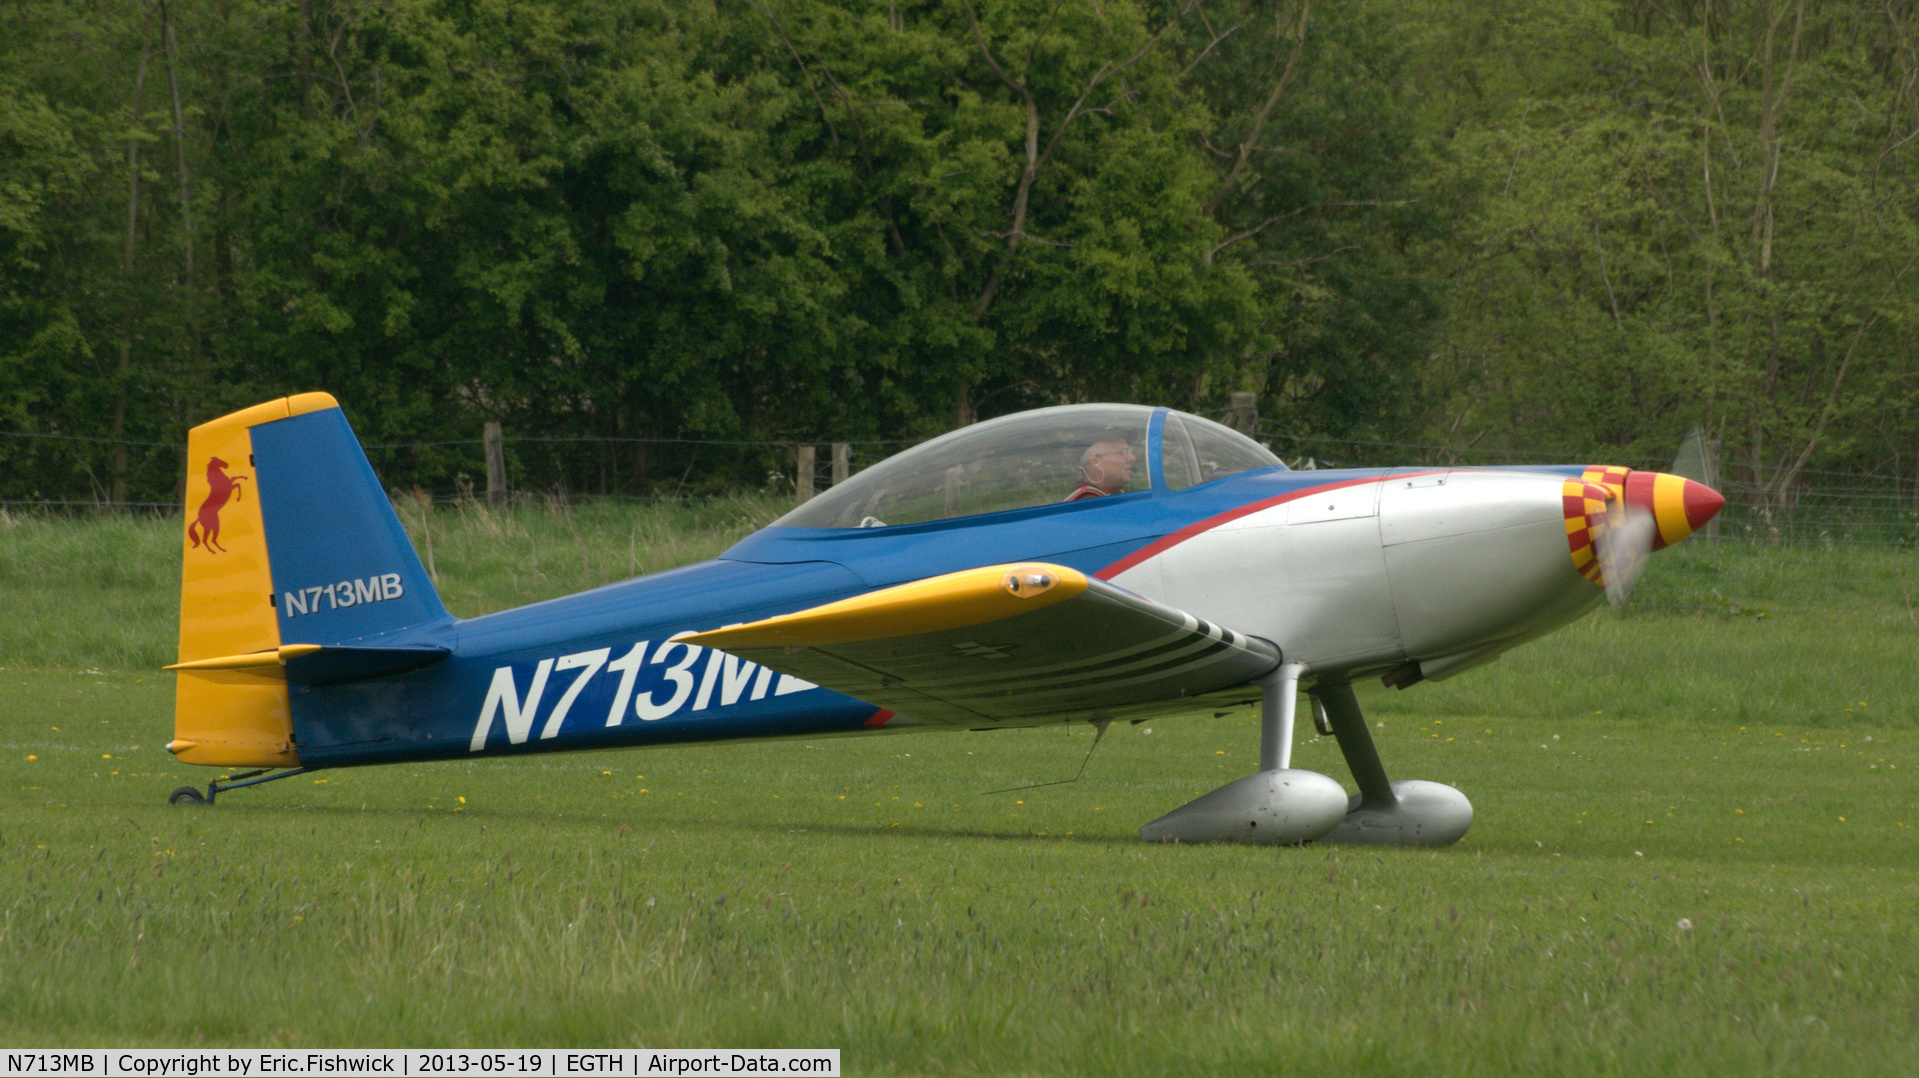 N713MB, 2006 Vans RV-8 C/N 82245, 3. N713MB at Shuttleworth Flying Day and LAA Party in the Park, May 2013.